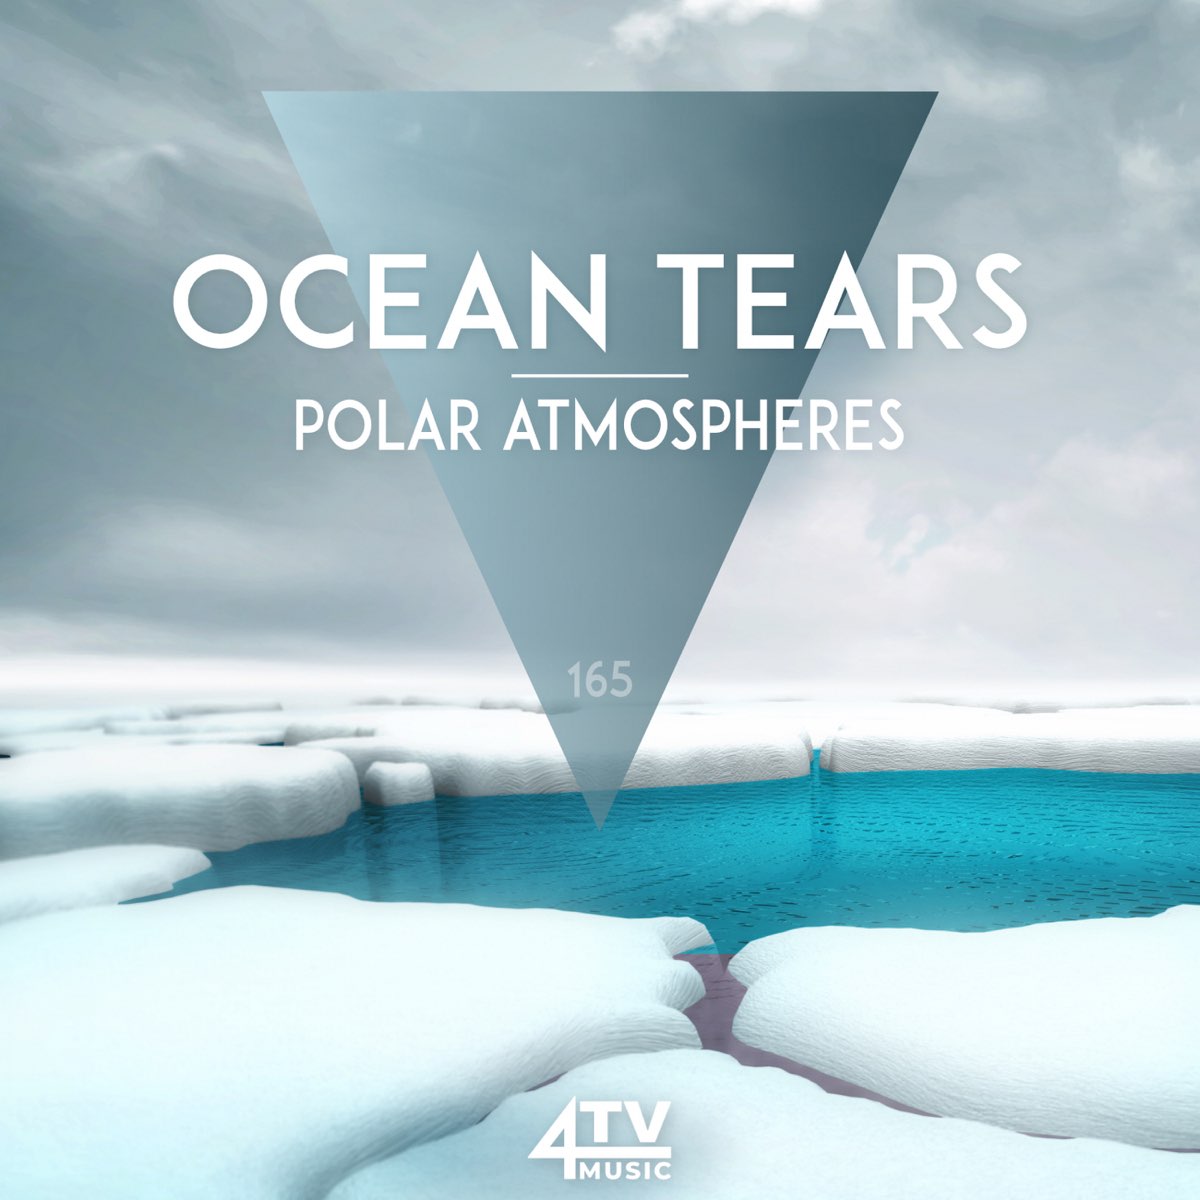 Ocean of tears. Fight Cold.